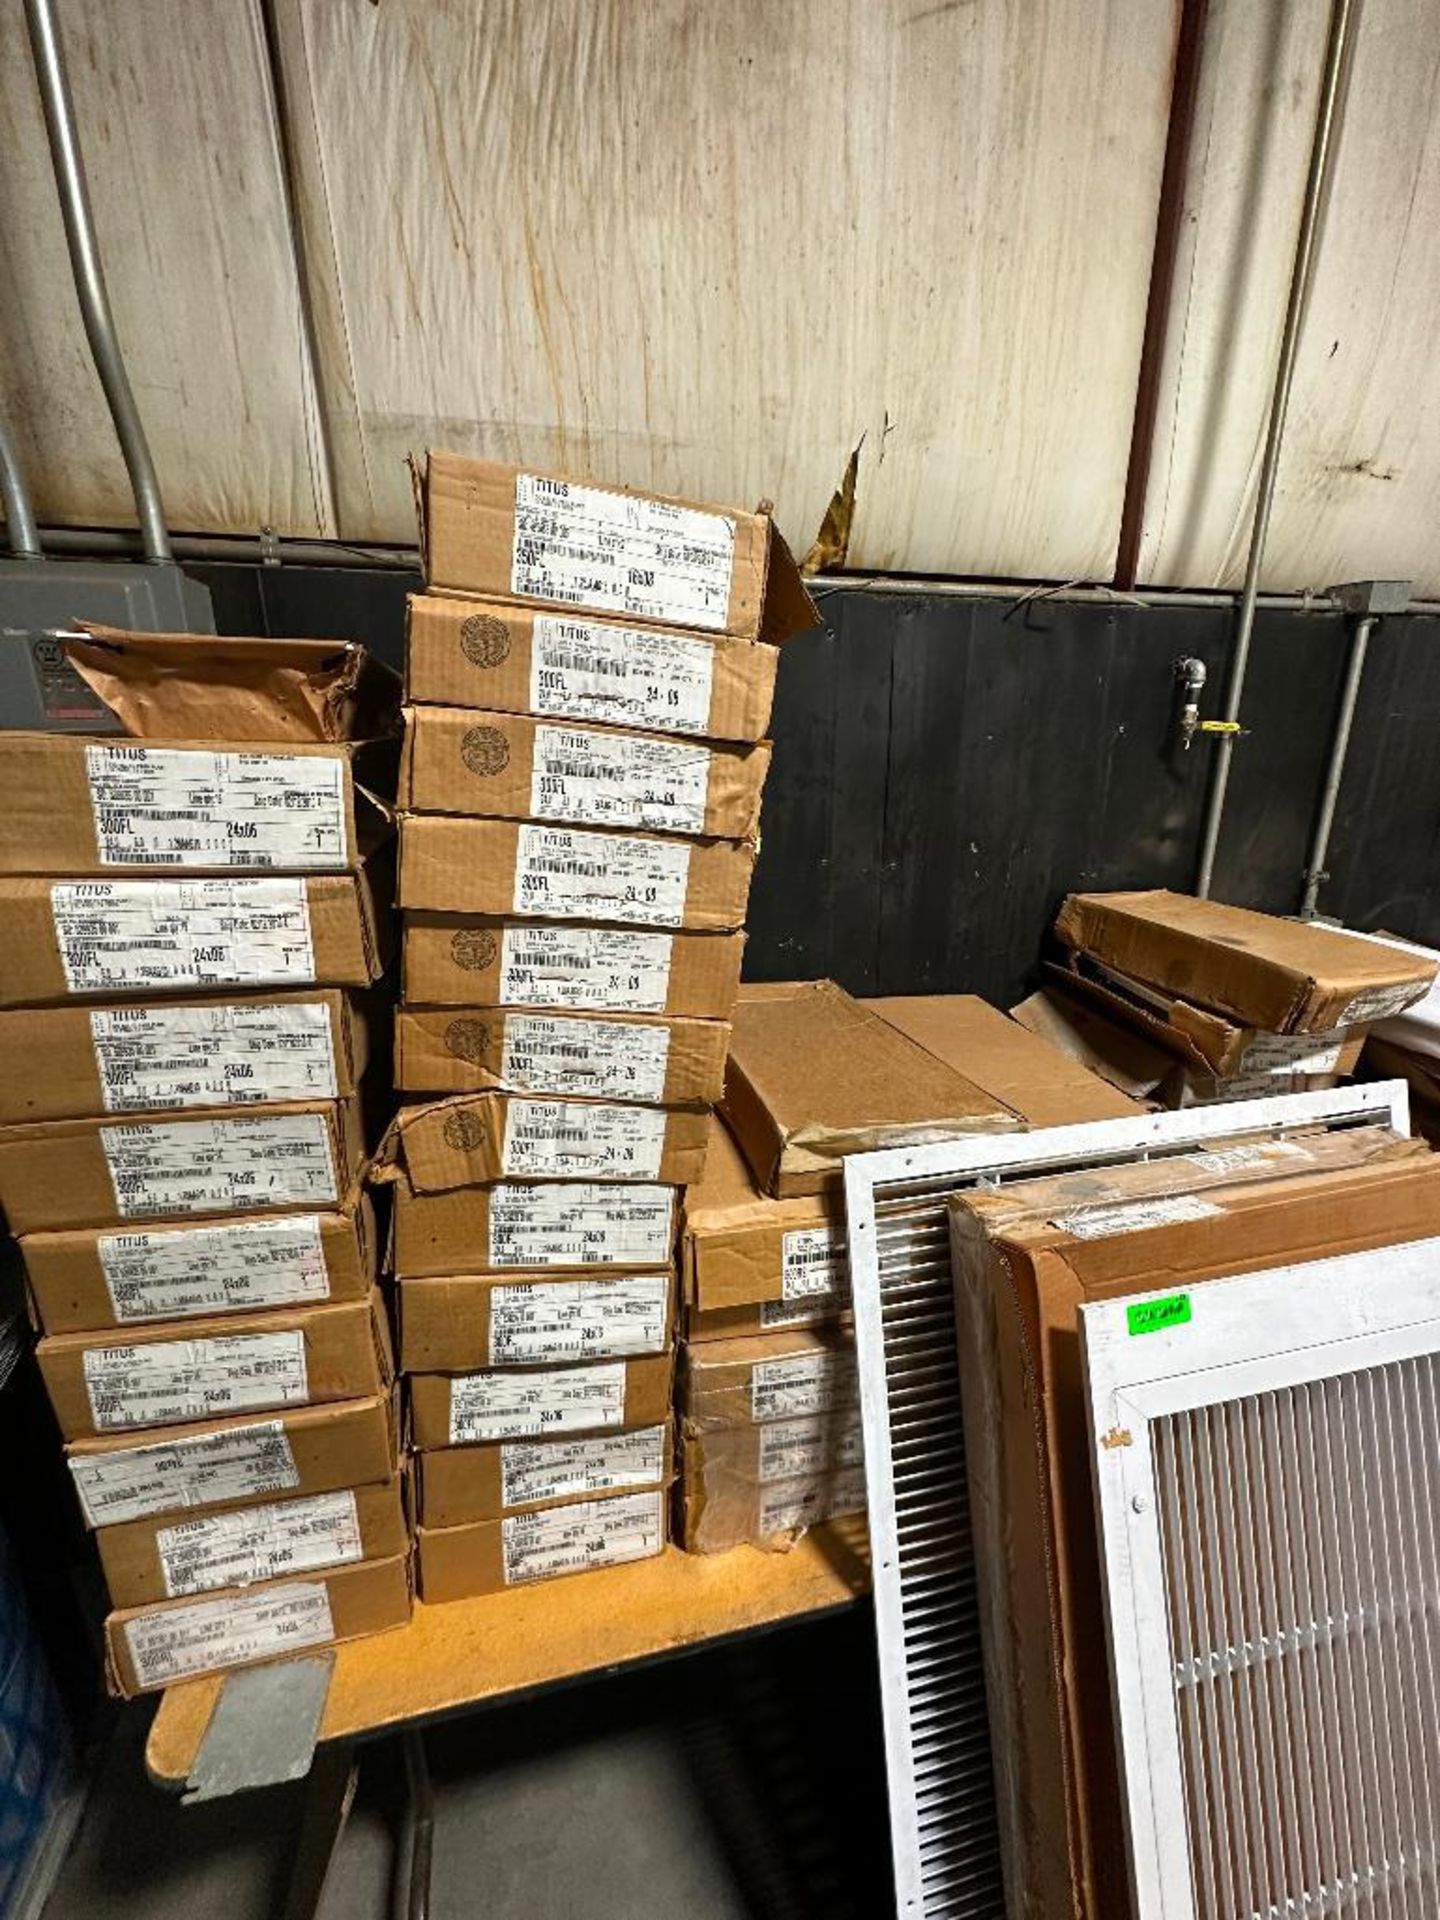 LARGE ASSORTMENT OF REGISTERS, VENT COVERS, AND OTHER HVAC PARTS - Image 3 of 3